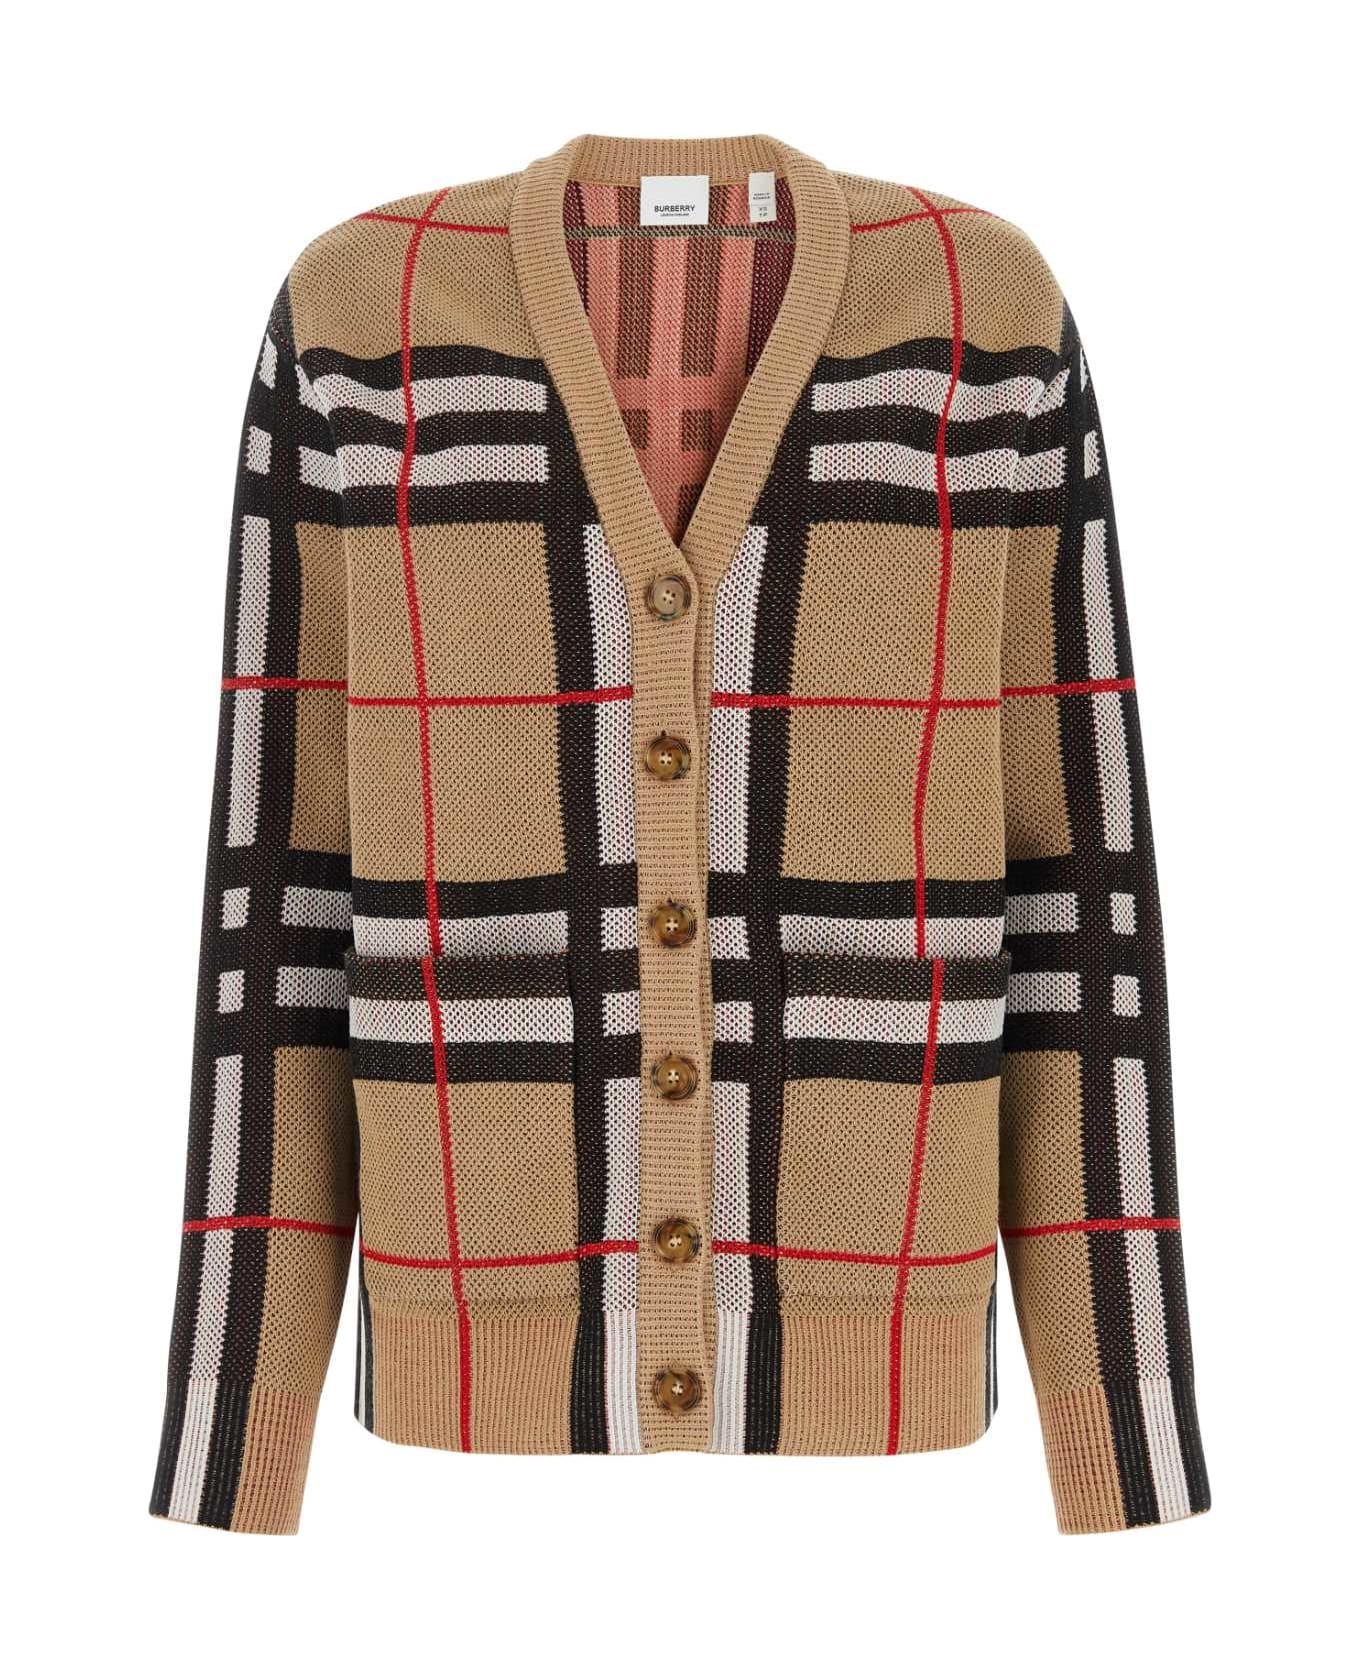 Burberry Embroidered Stretch Nylon Blend Cardigan - ARCHIVEBEIGE